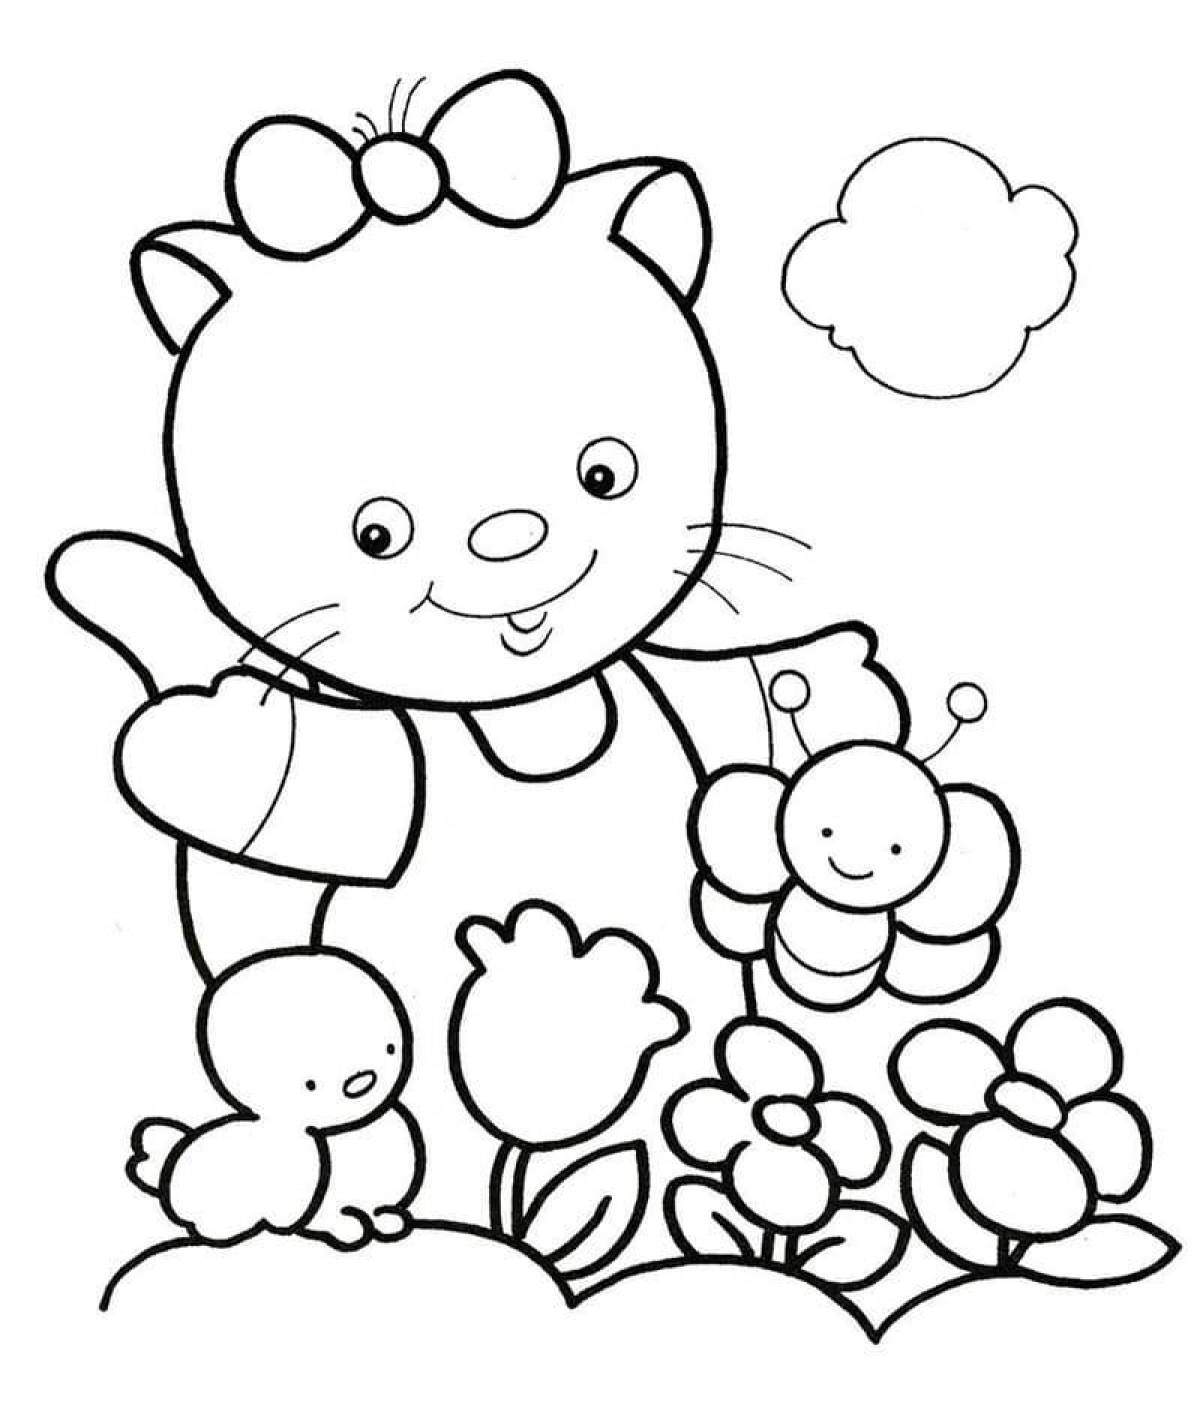 Colorful 45th Anniversary Coloring Page